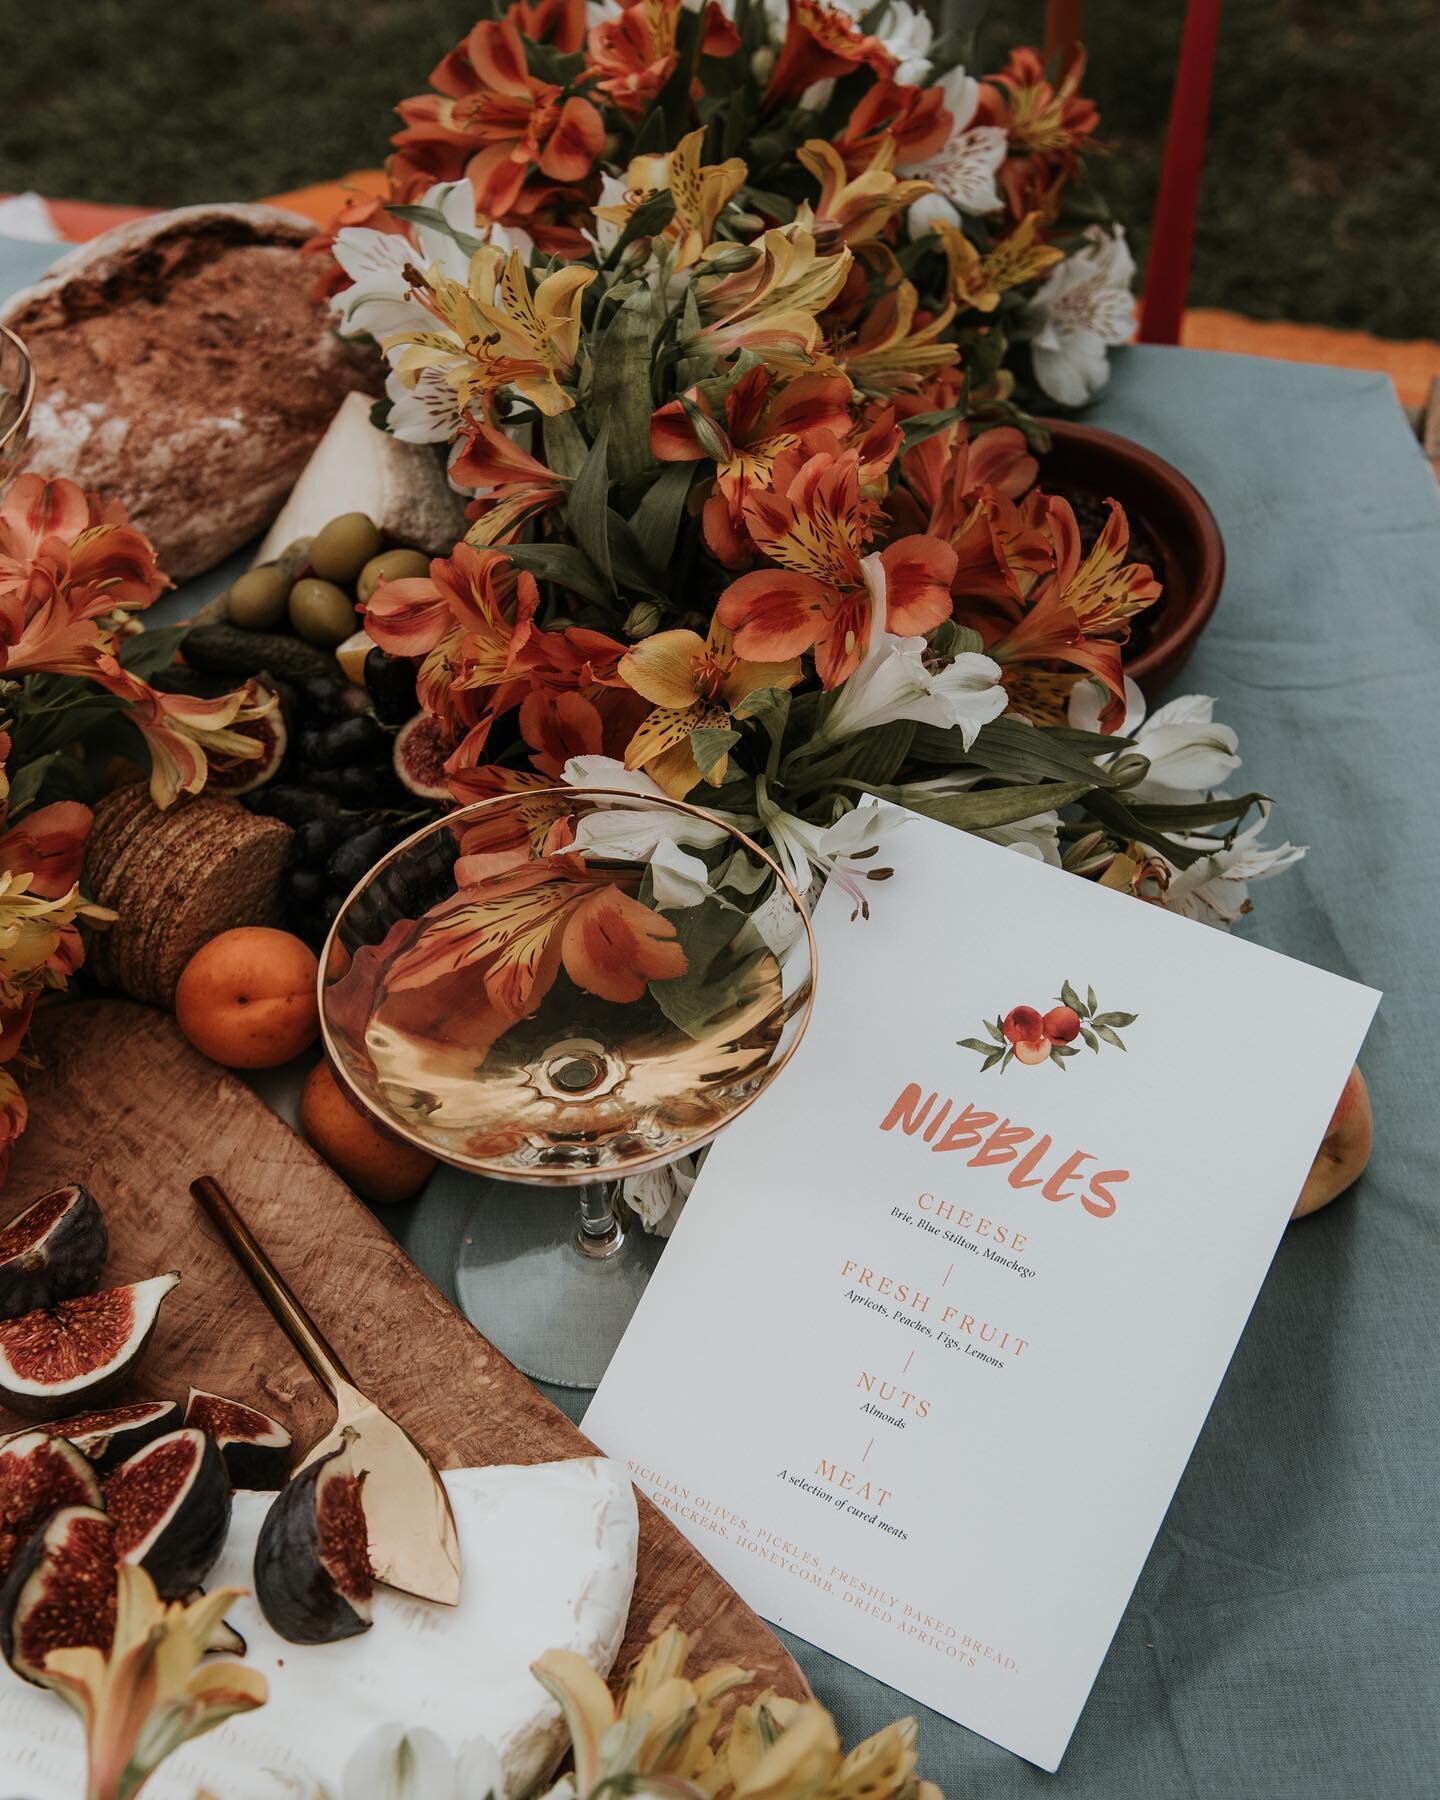 // S U M M E R  S U N //

This weeks heat wave is giving us serious elopement vibes. This intimate champagne picnic at the beautiful Hampstead Heath was inspired by the film &lsquo;Call me by your name&rsquo; 

We were fortunate to have this incredib